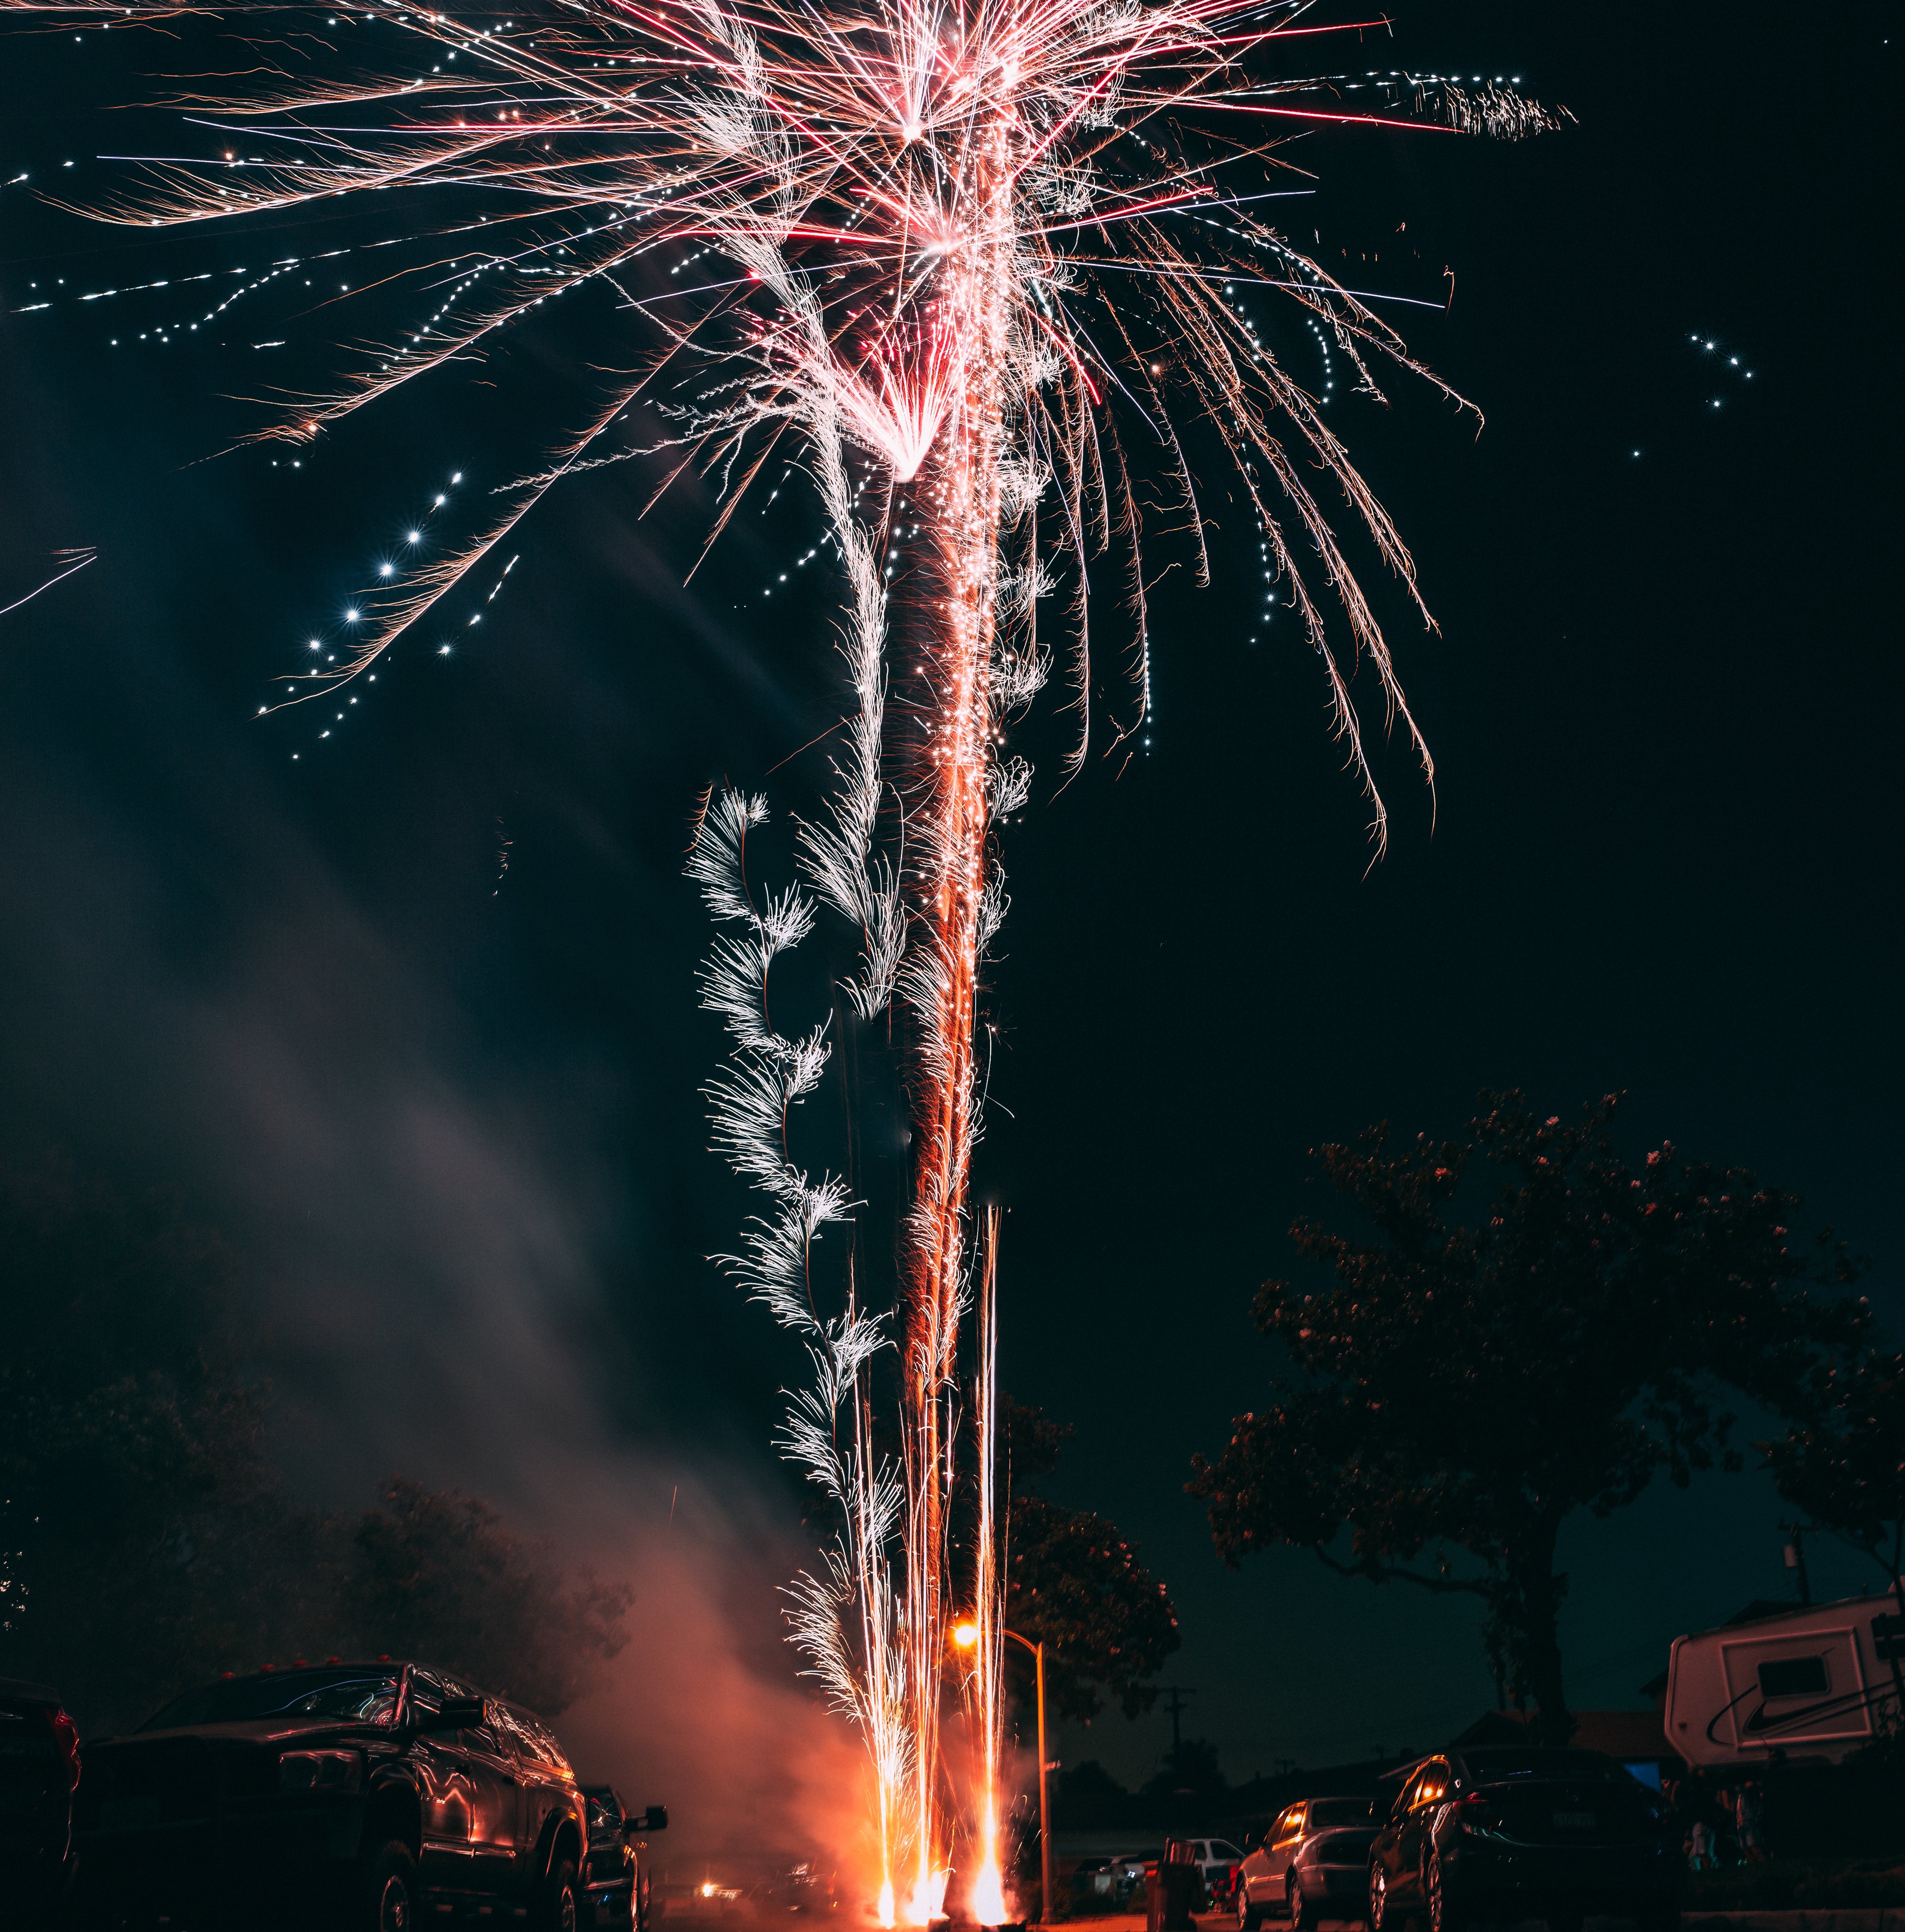 salute, holidays, night, sparks, holiday, fireworks, firework phone wallpaper